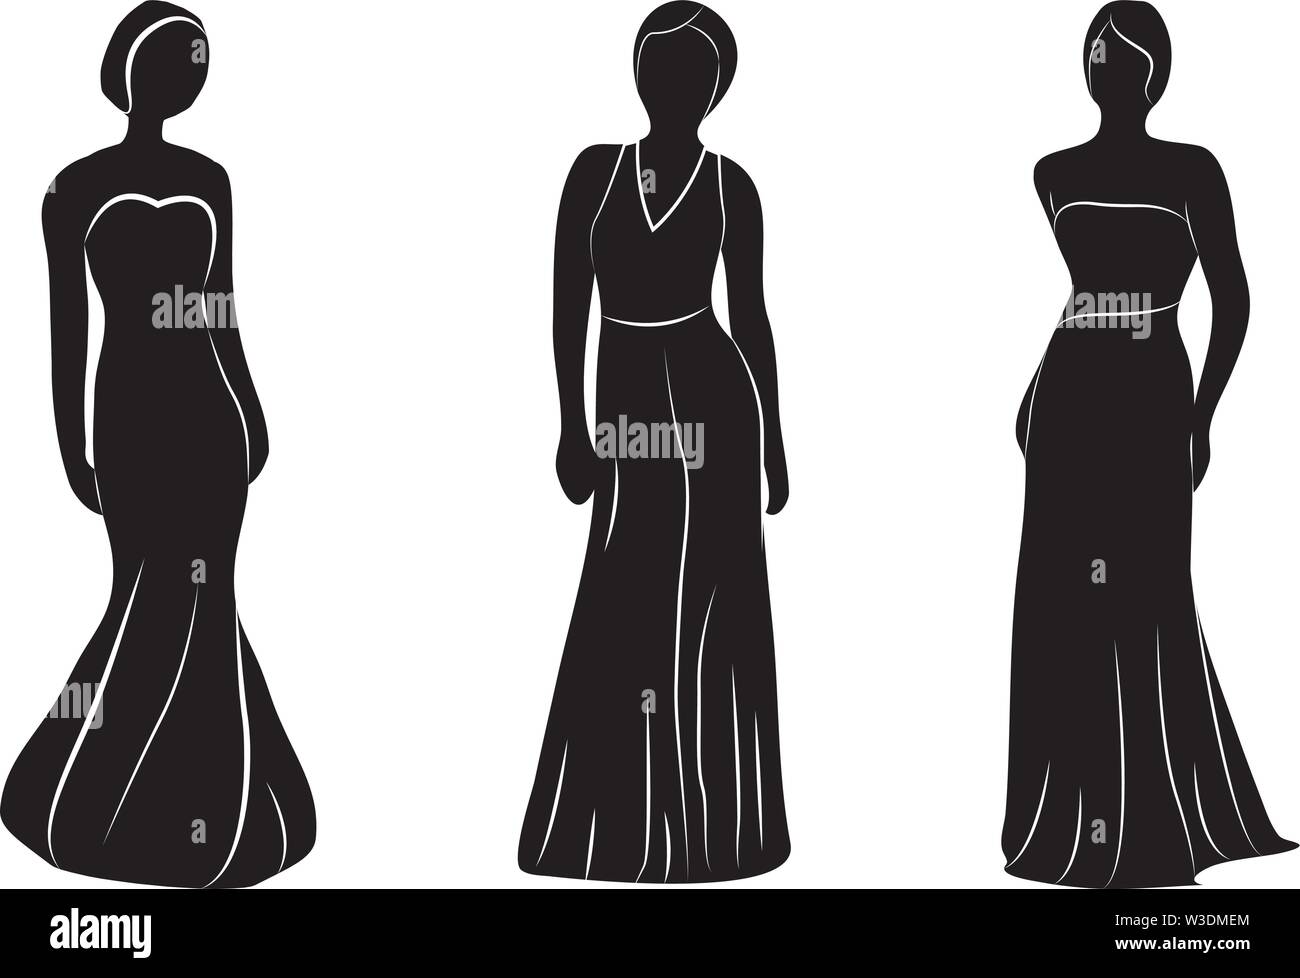 Young wemen in evening dresses  silhuettes vector illustrations Stock Vector